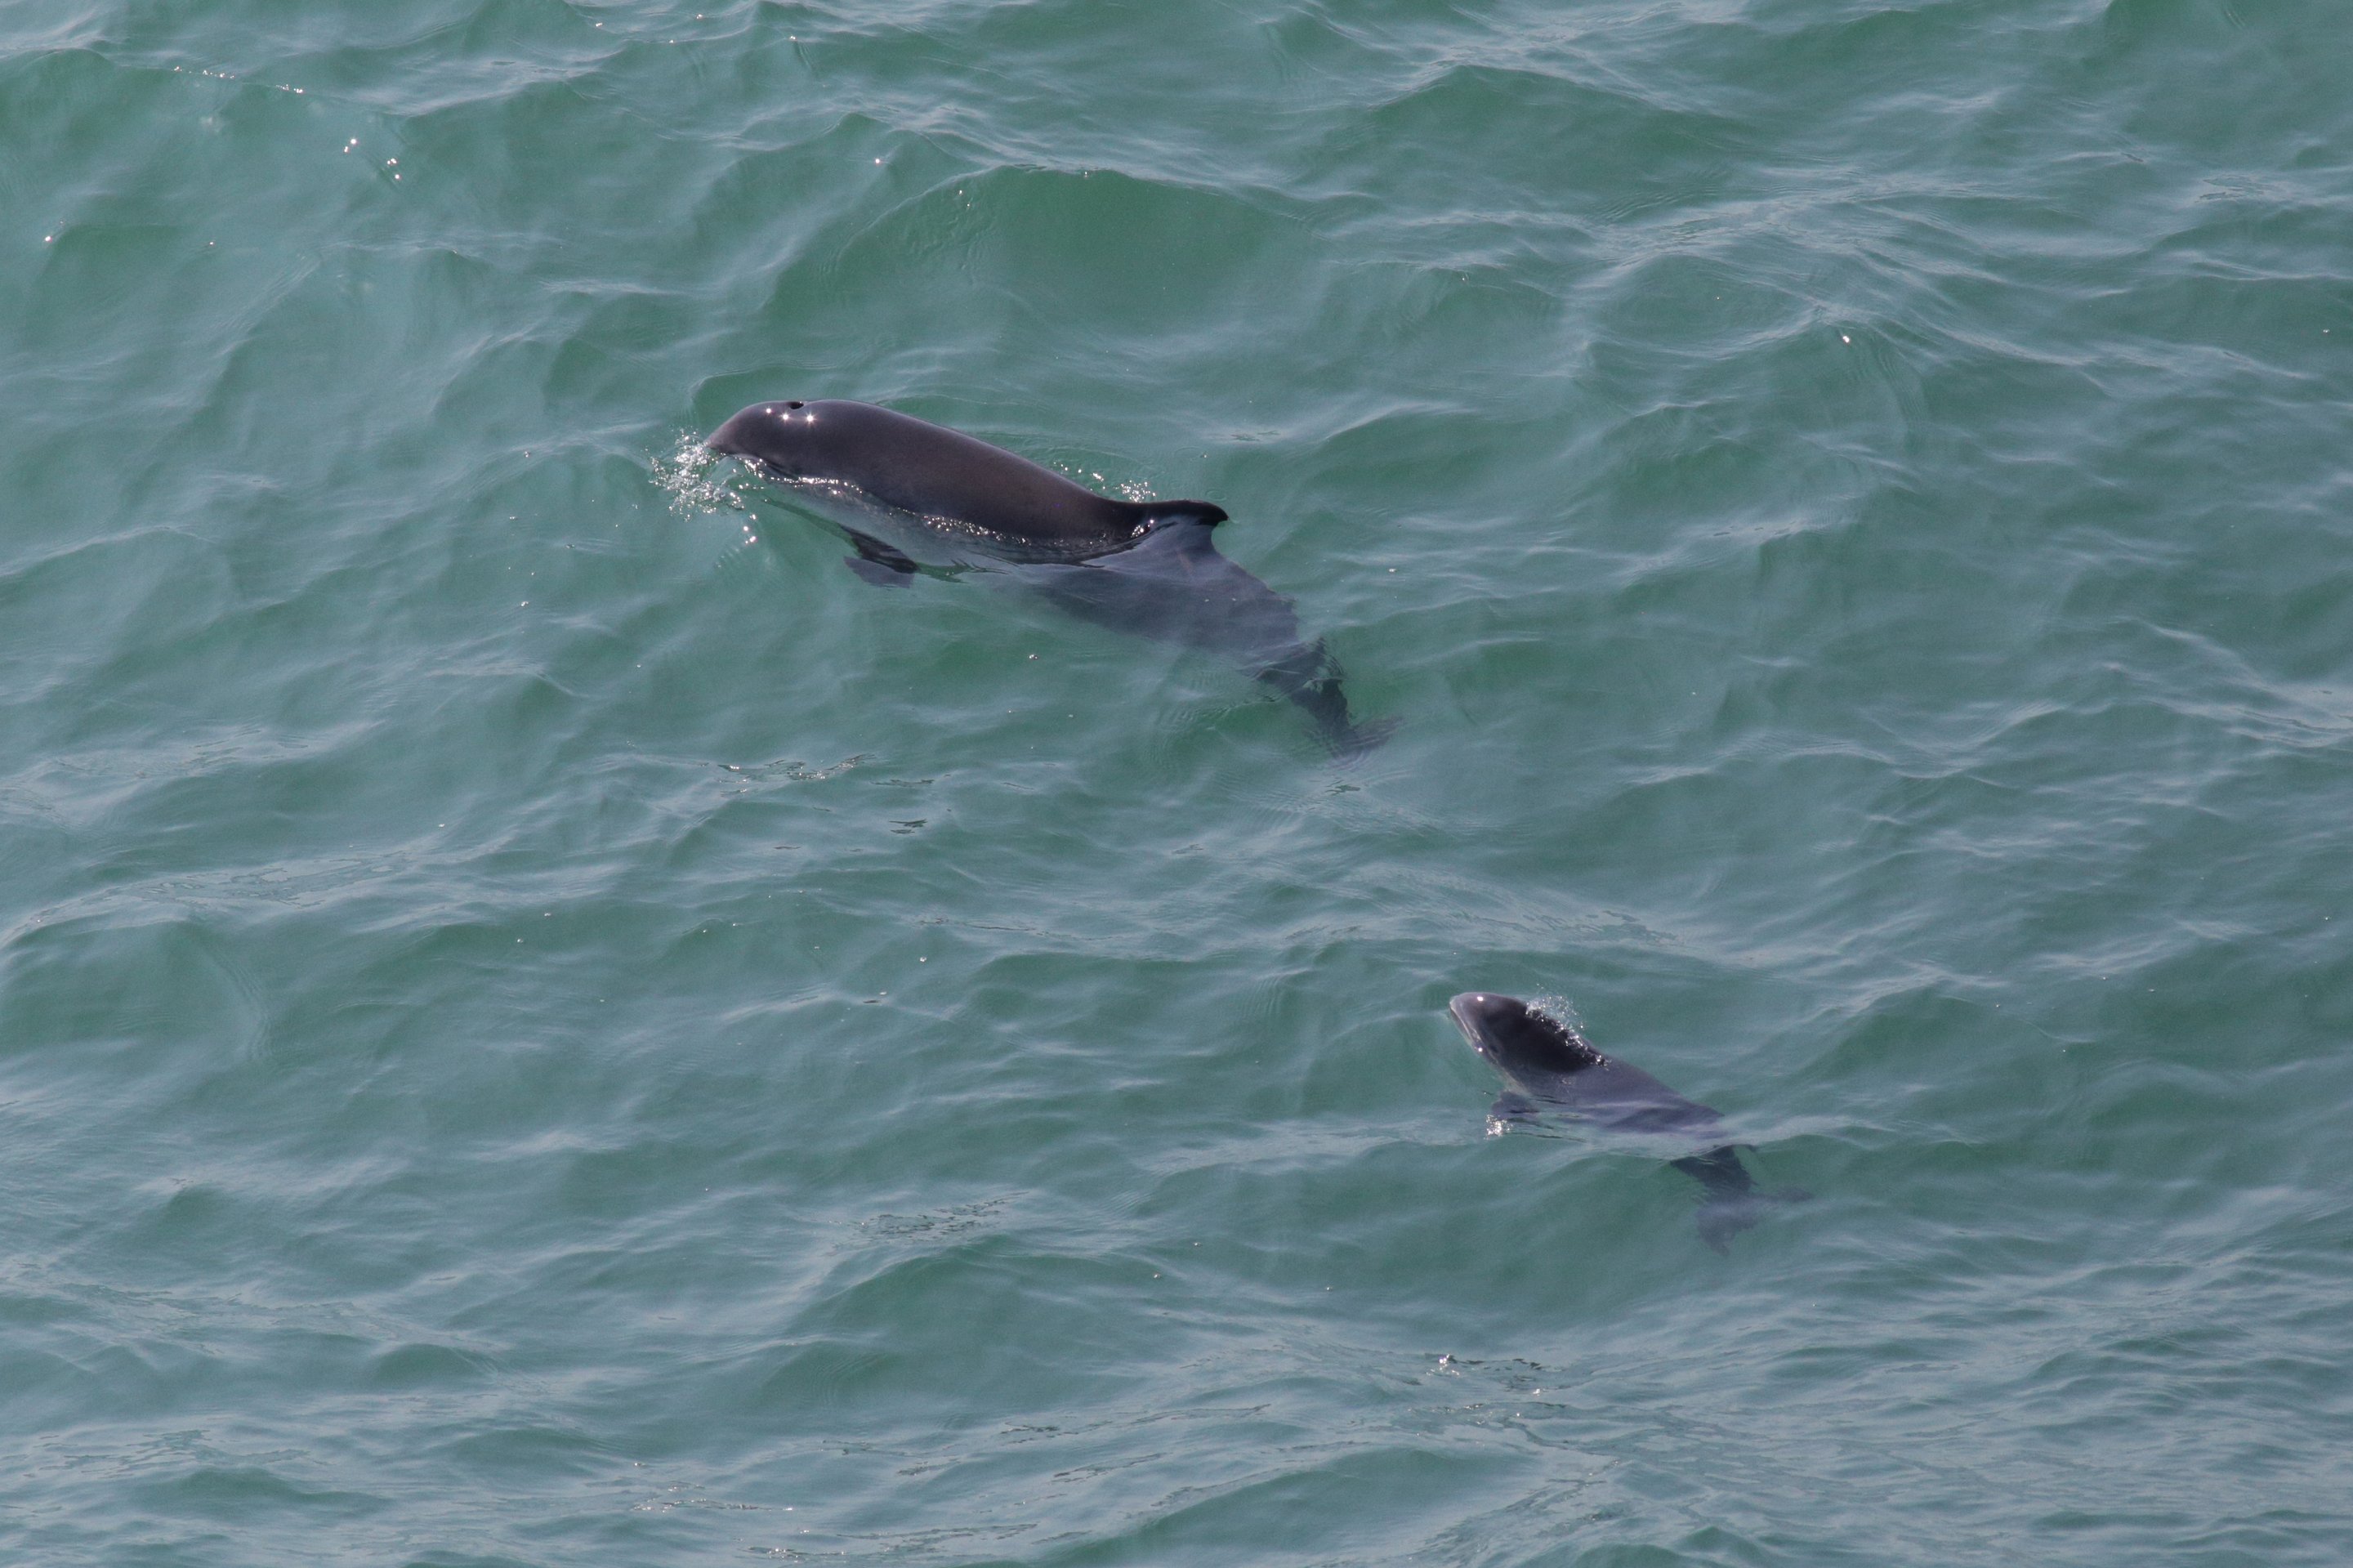  A harbour porpoise with its calf.